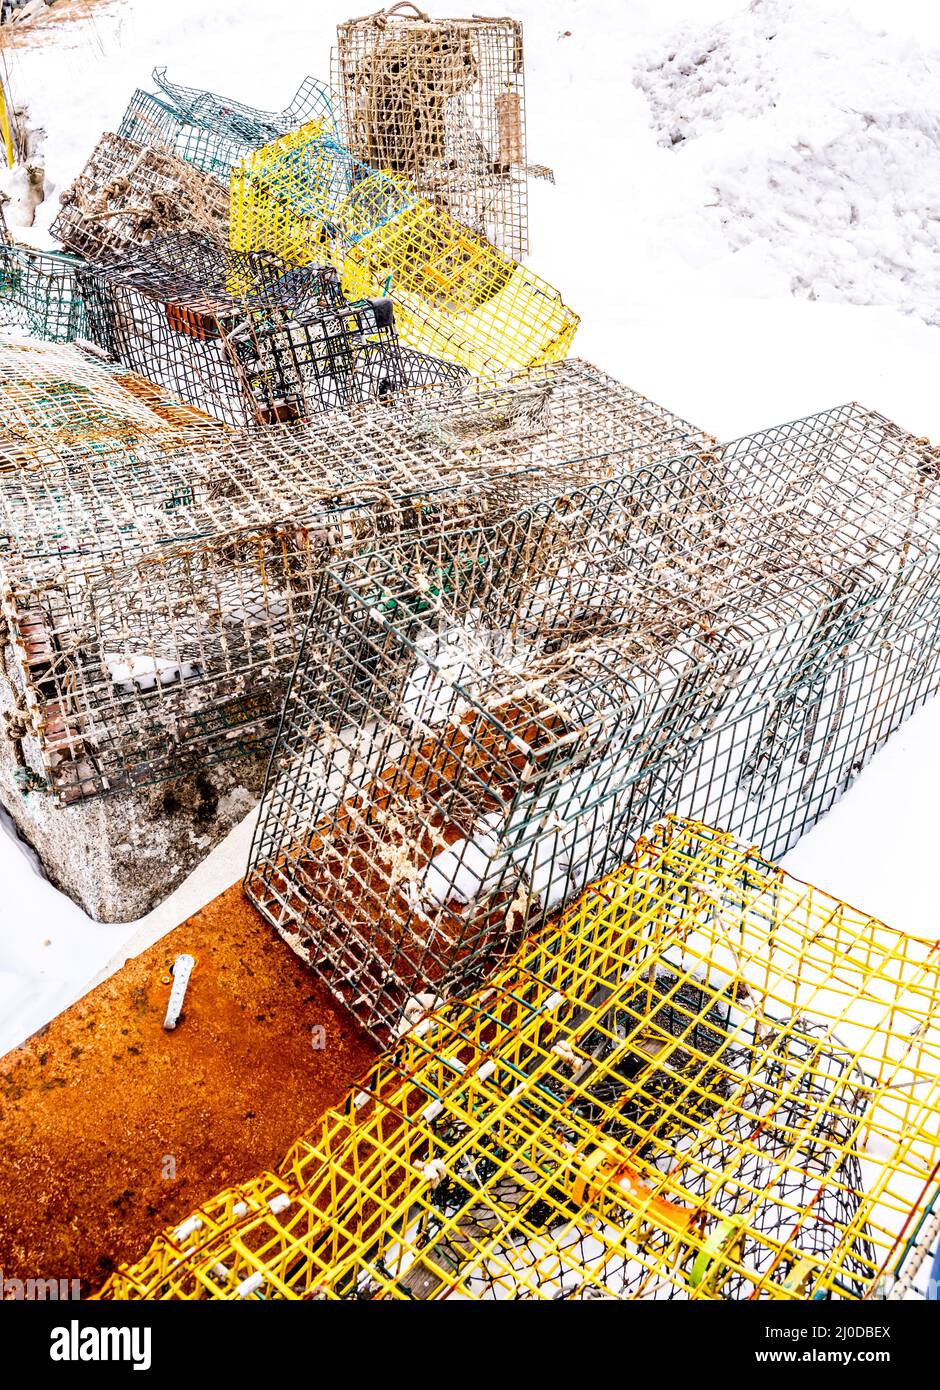 These Lobster traps once where stacked on top of one another, now all over and covered with snow. Owner could not get them before the snow storm hit. Stock Photo